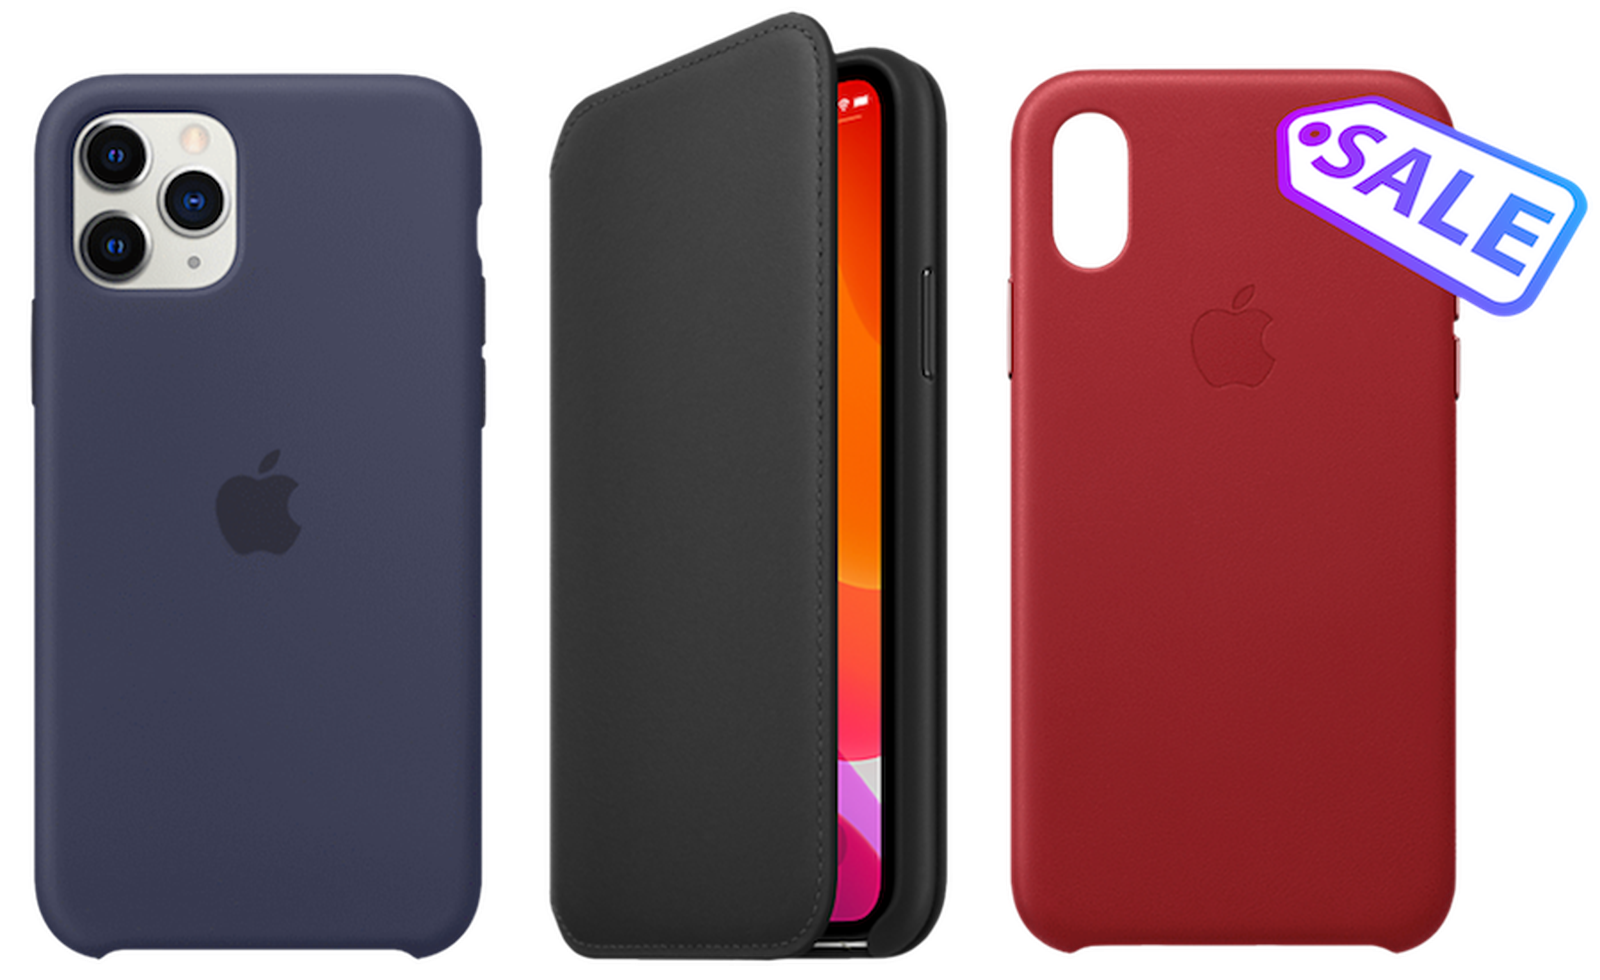 Deals: Official iPhone Cases Discounted by 60% at Verizon, Starting at